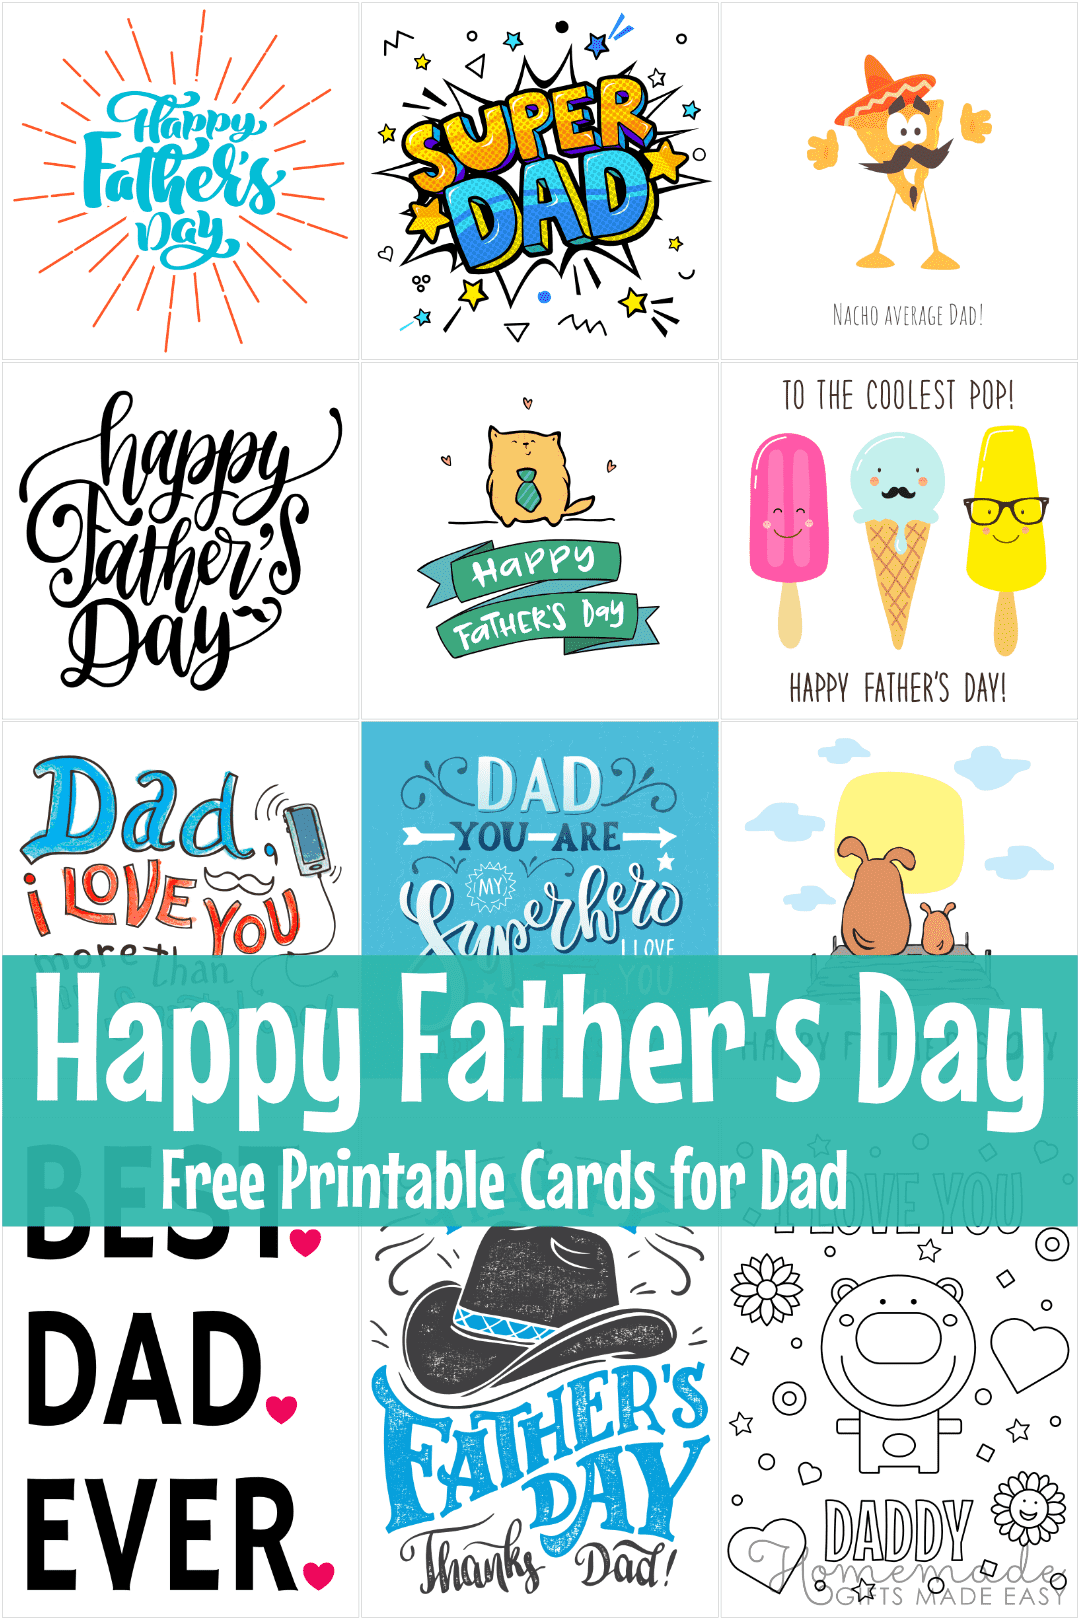 Download 75 Happy Father's Day Messages 2021 | What To Write In A ...